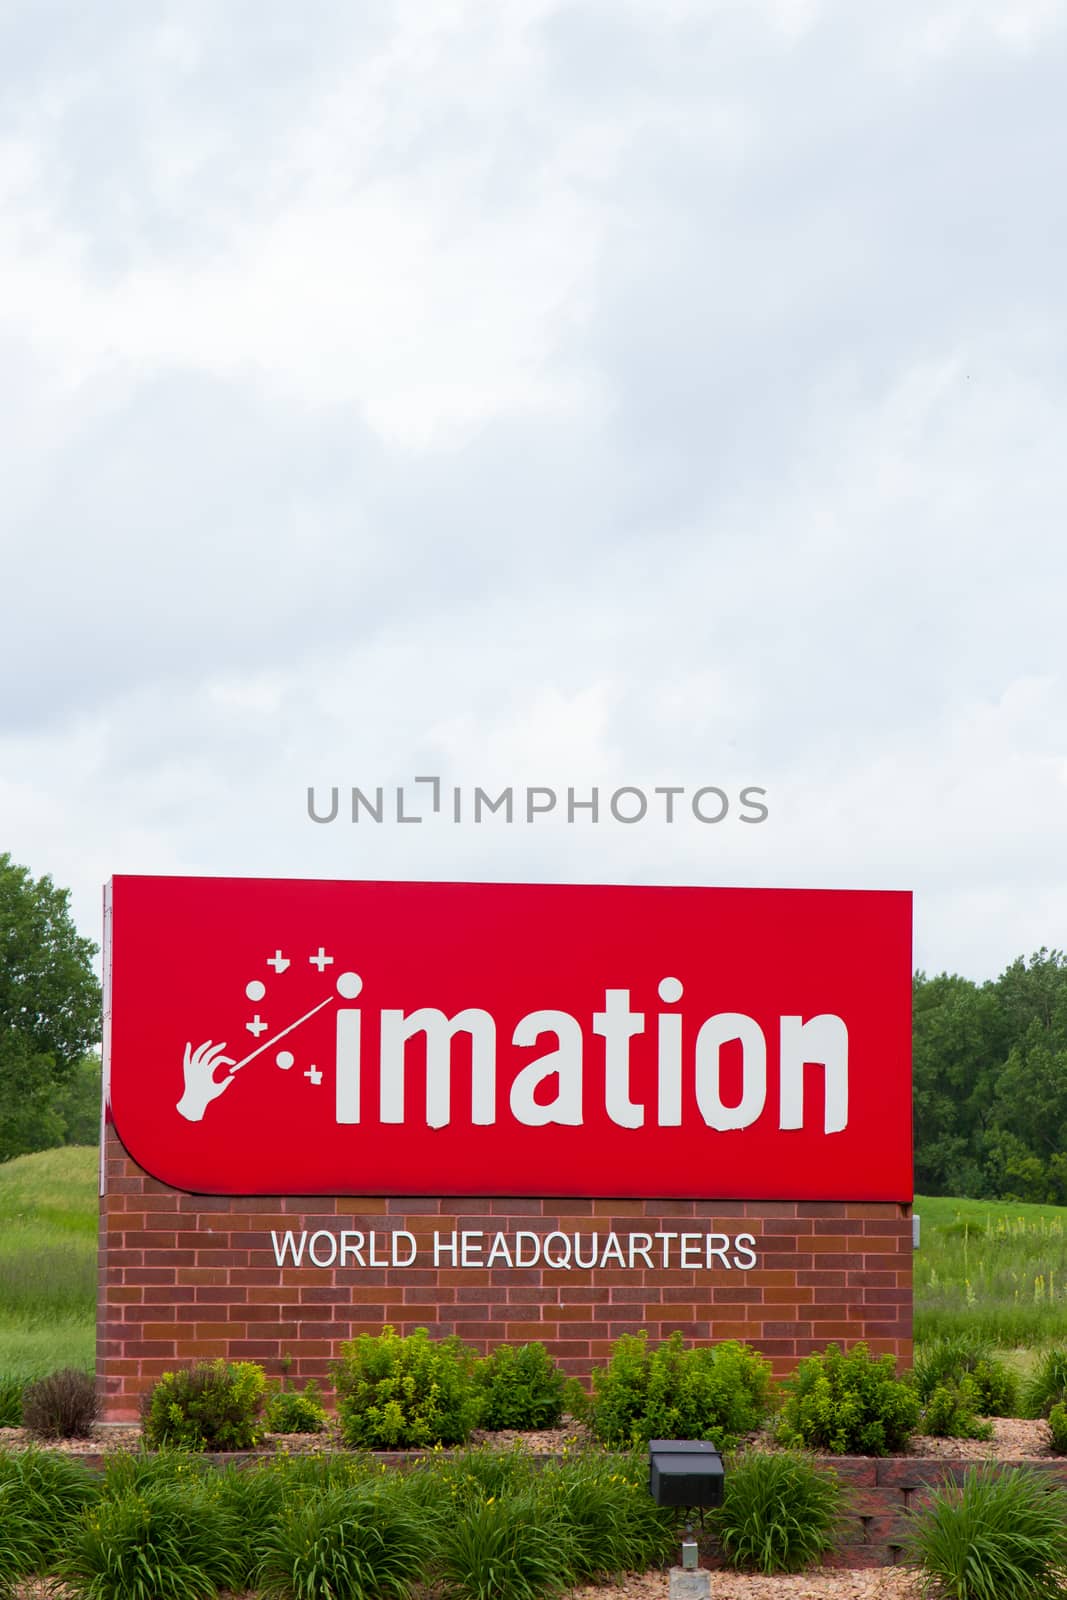 Imation World Headquarters by wolterk